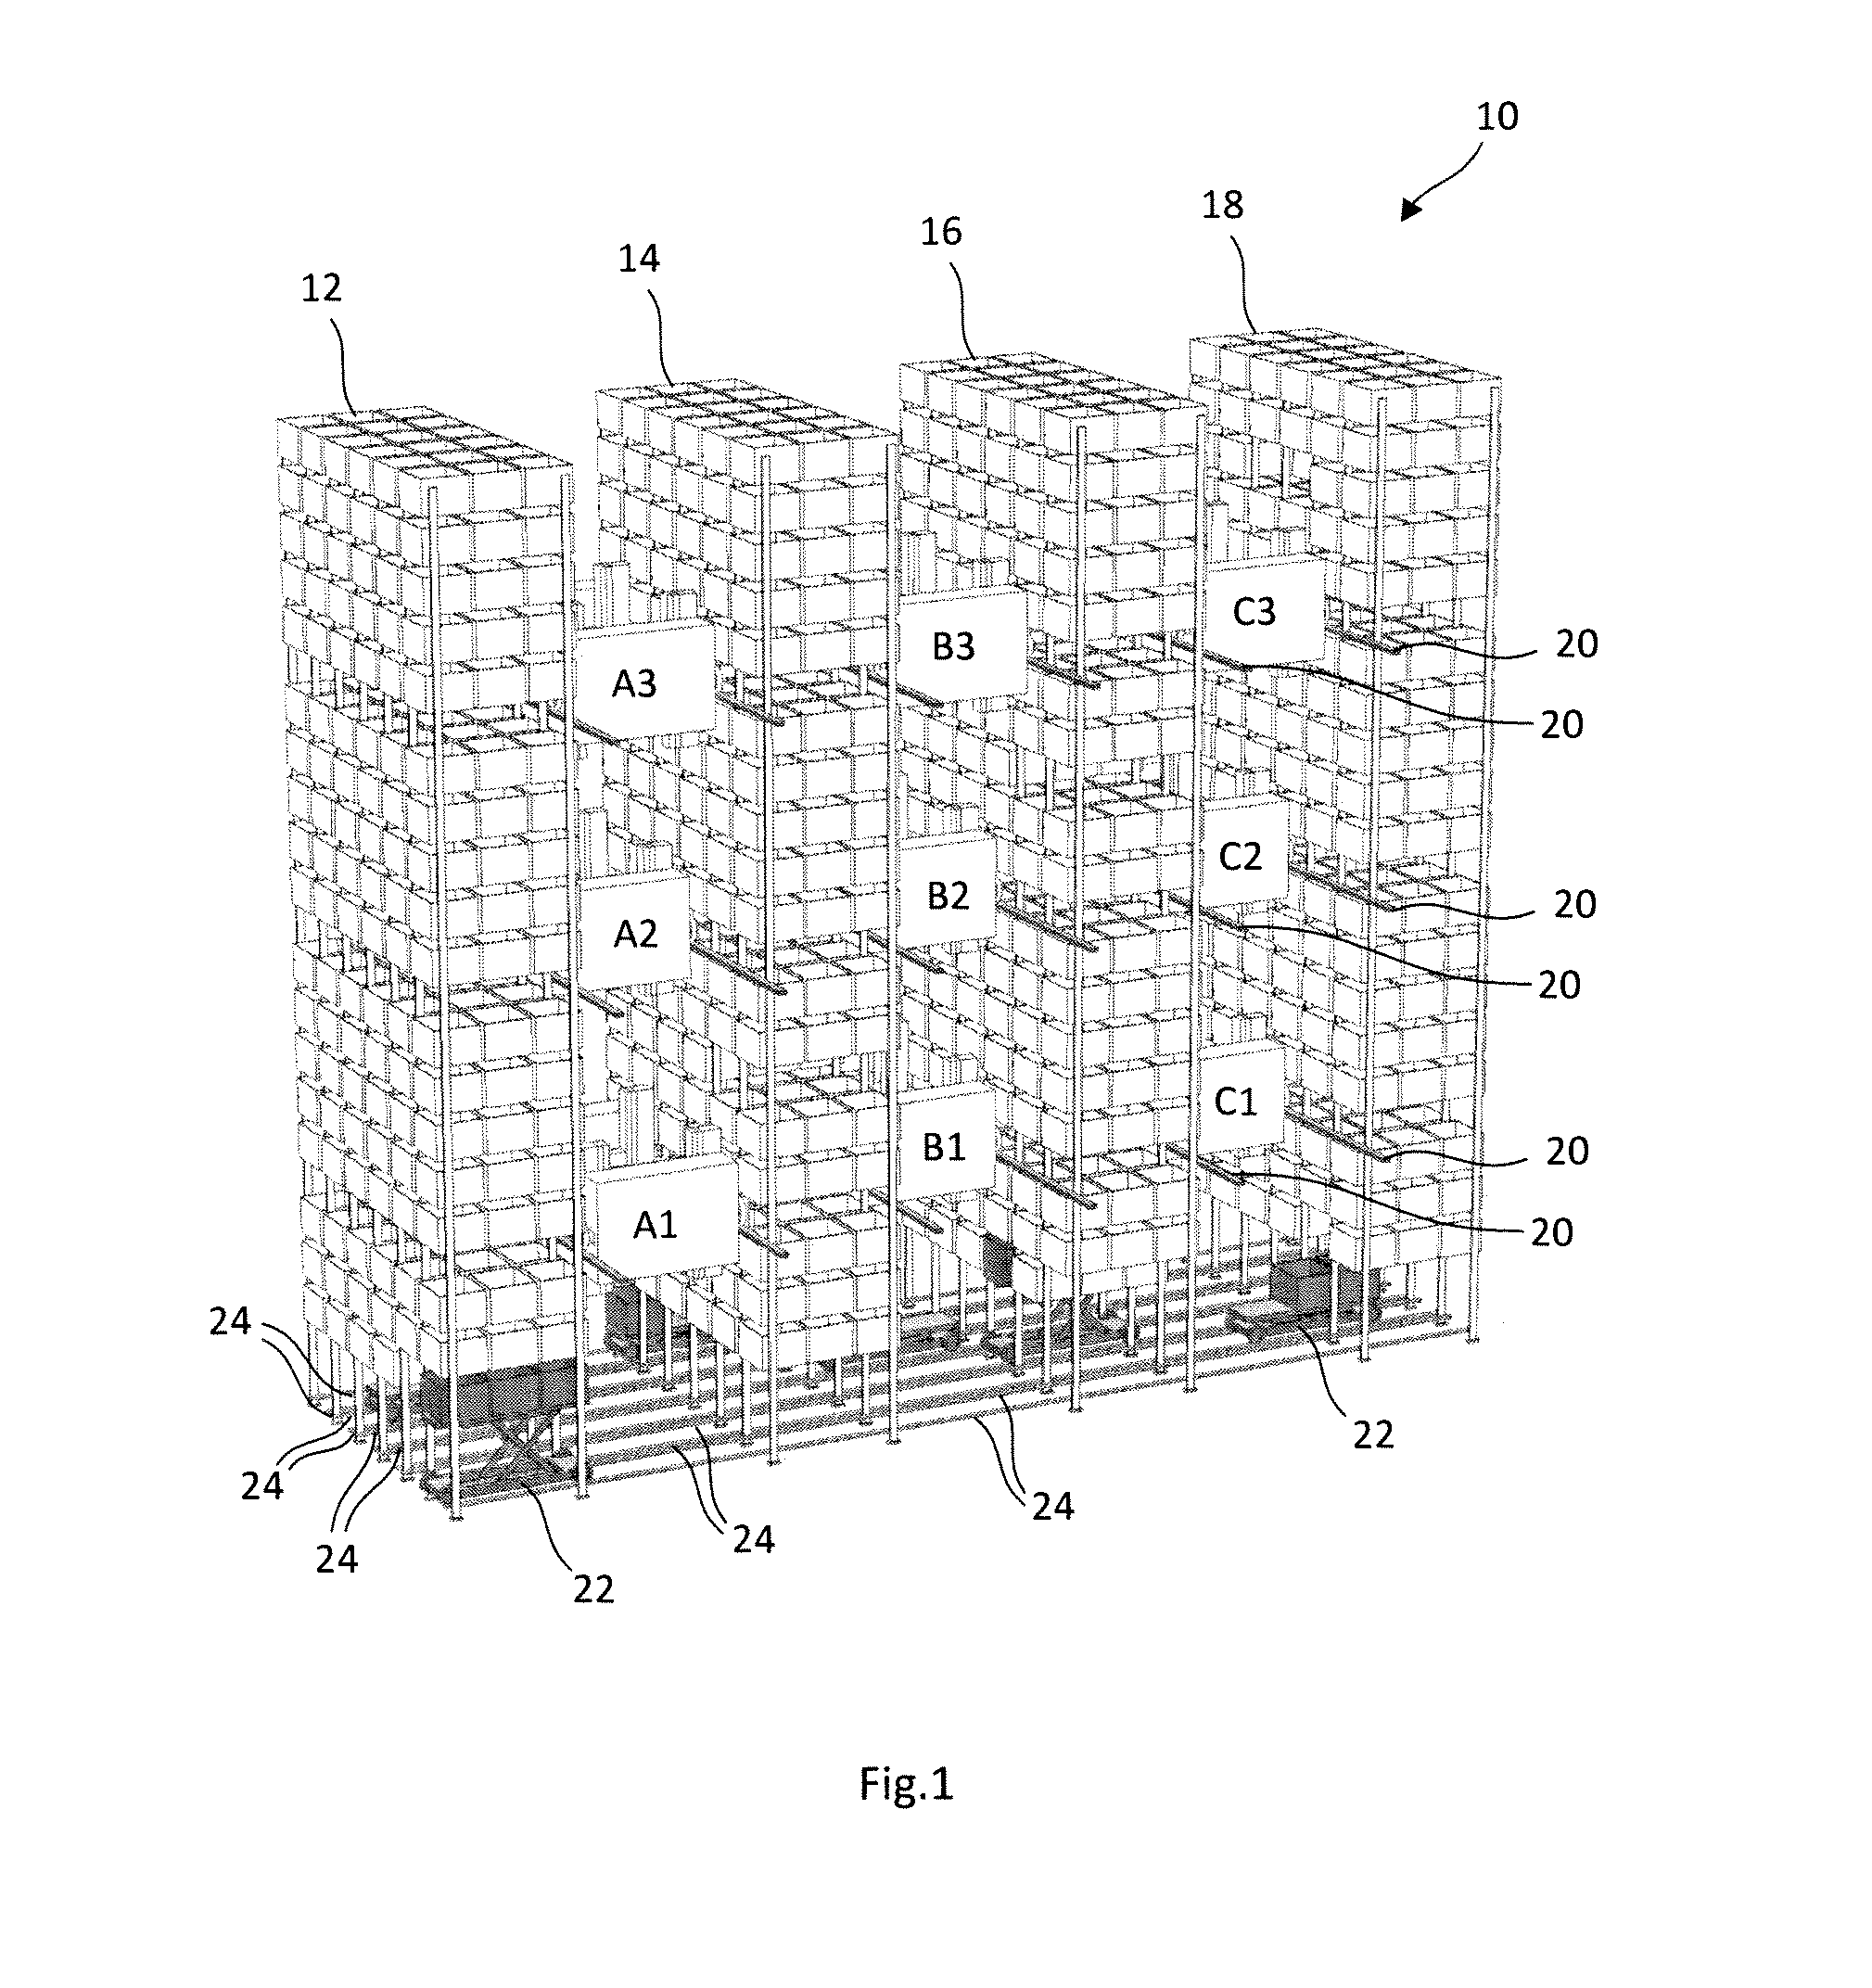 Multi-level storage system with transportation devices movable in substantially perpendicular directions and method of transferring containers in desired sequence